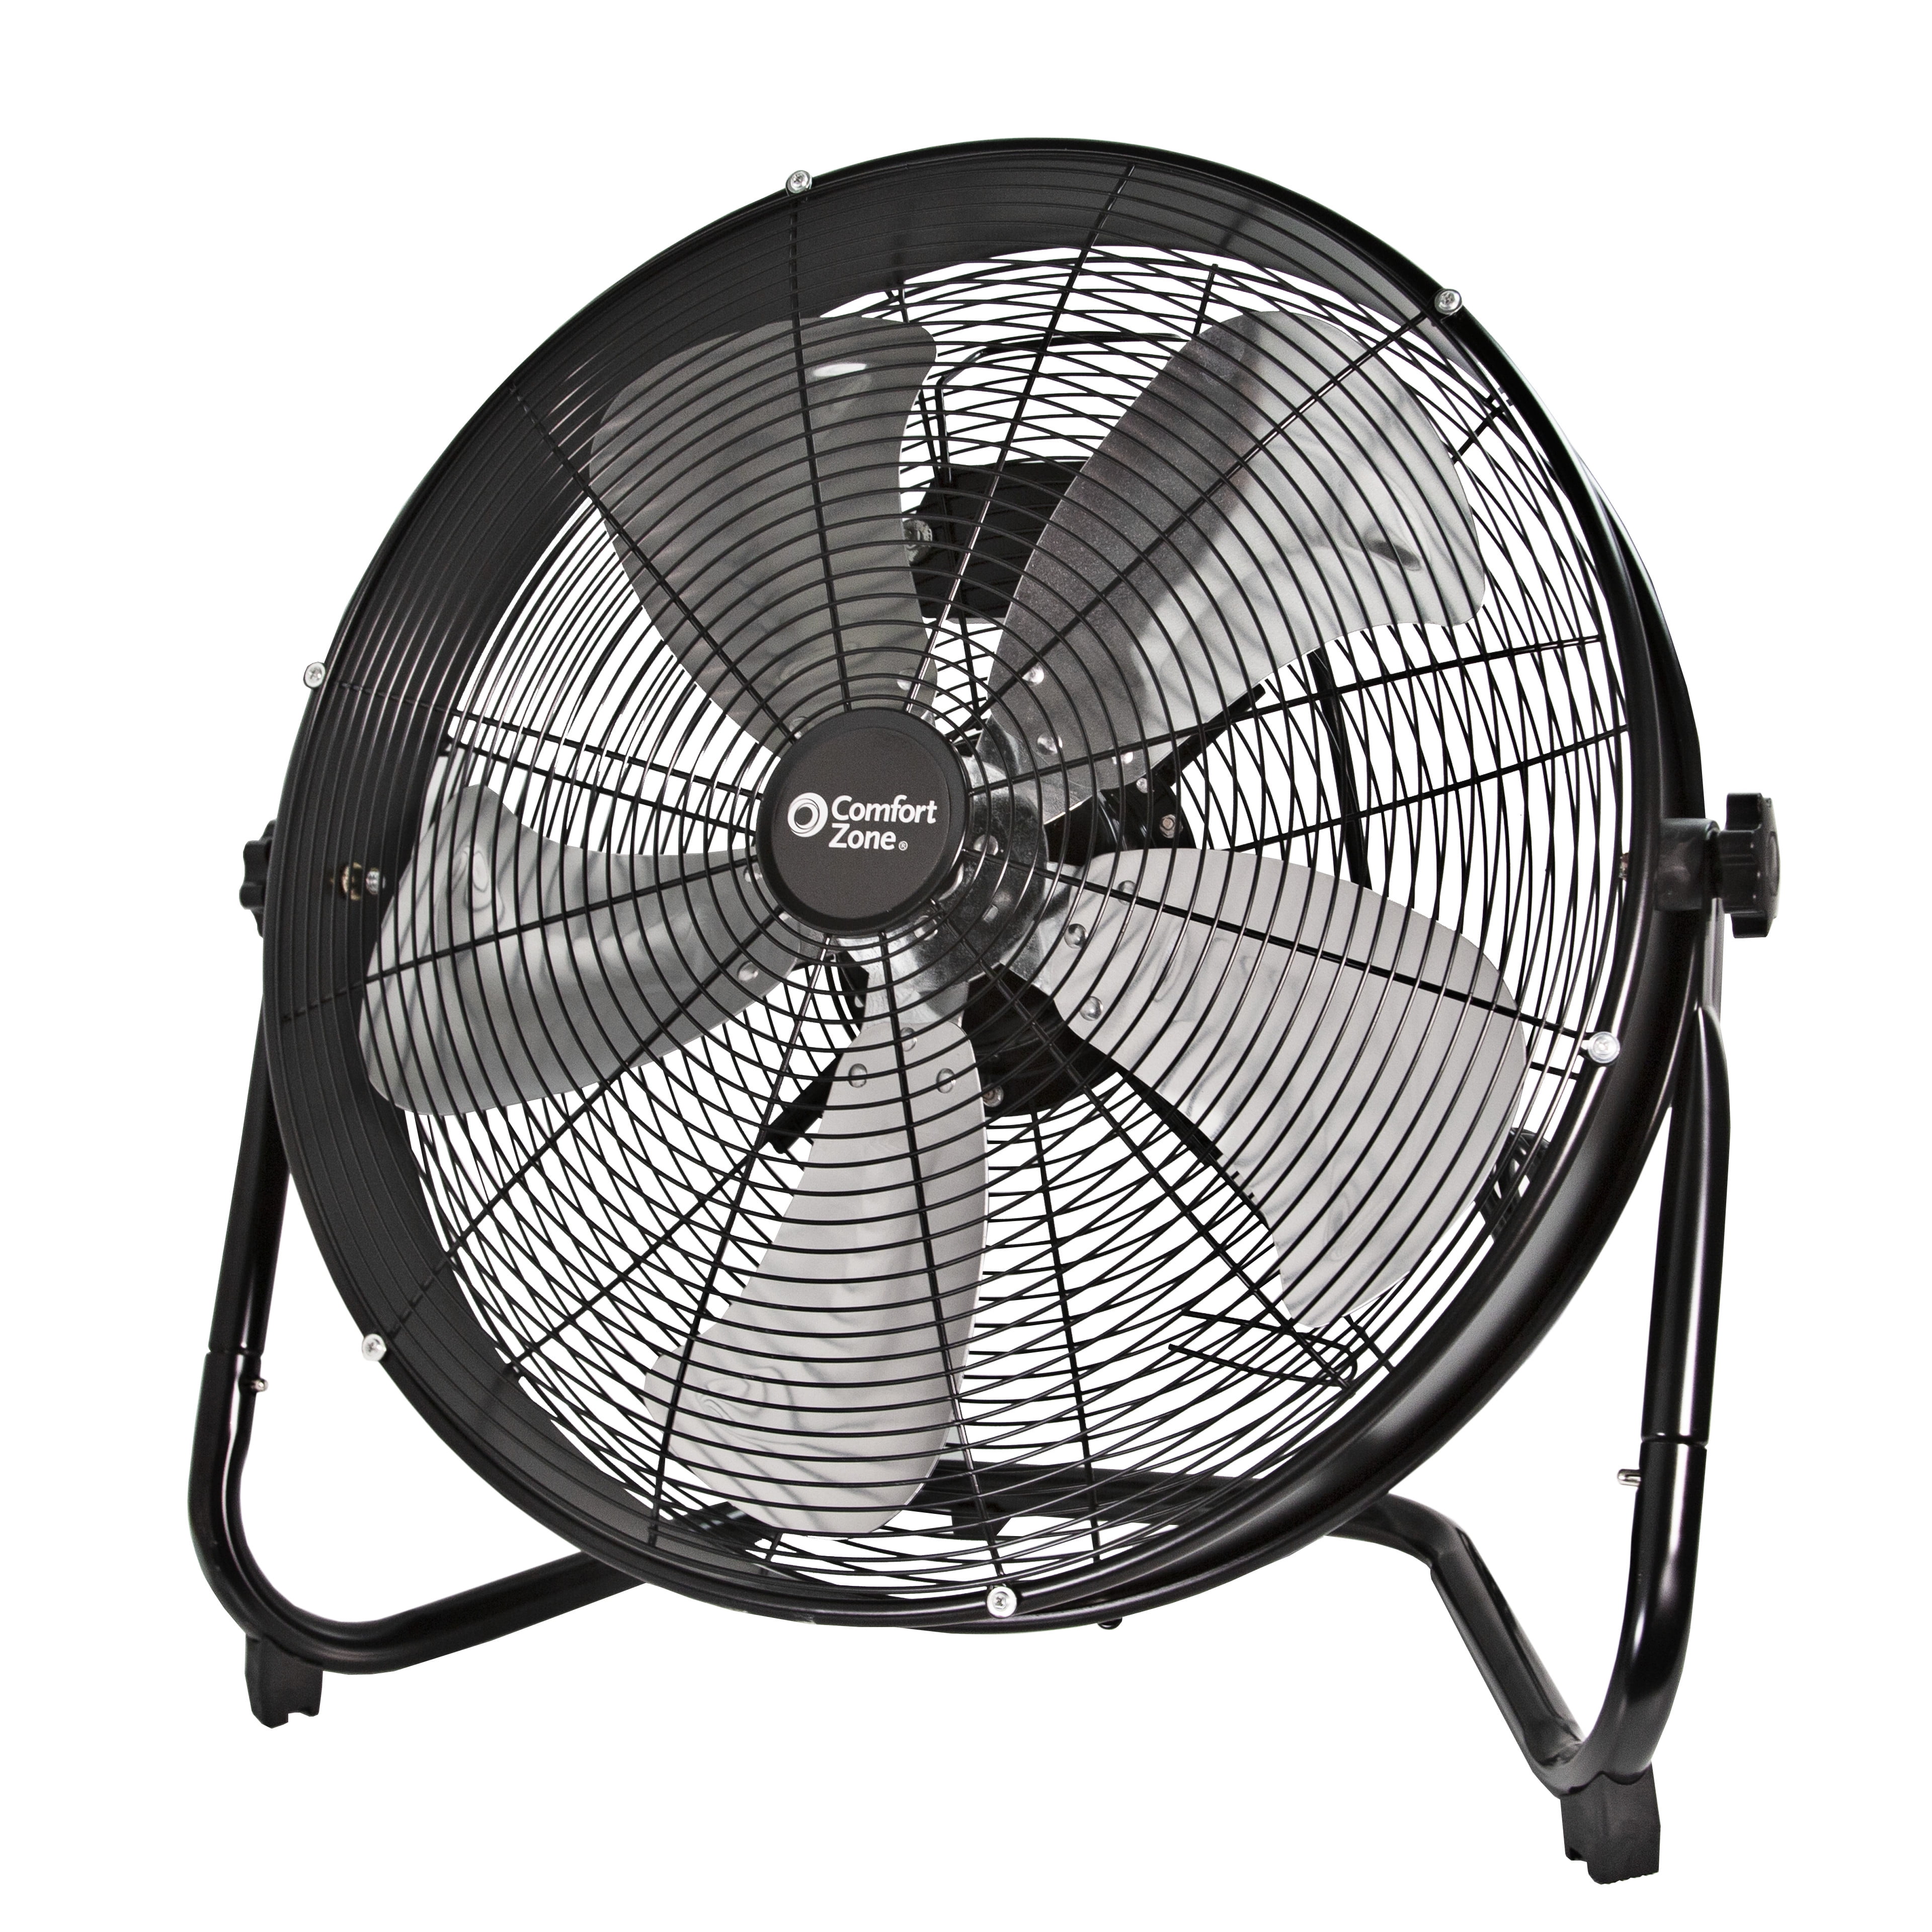 Comfort Zone 20” 3-Speed High-Velocity Slim Industrial Drum Fan, All-Metal  Construction, 180-Degree Adjustable Tilt, Large Knobs to Lock Tilt Angle,  5-Aluminum Blades, and Carry Handle, Black